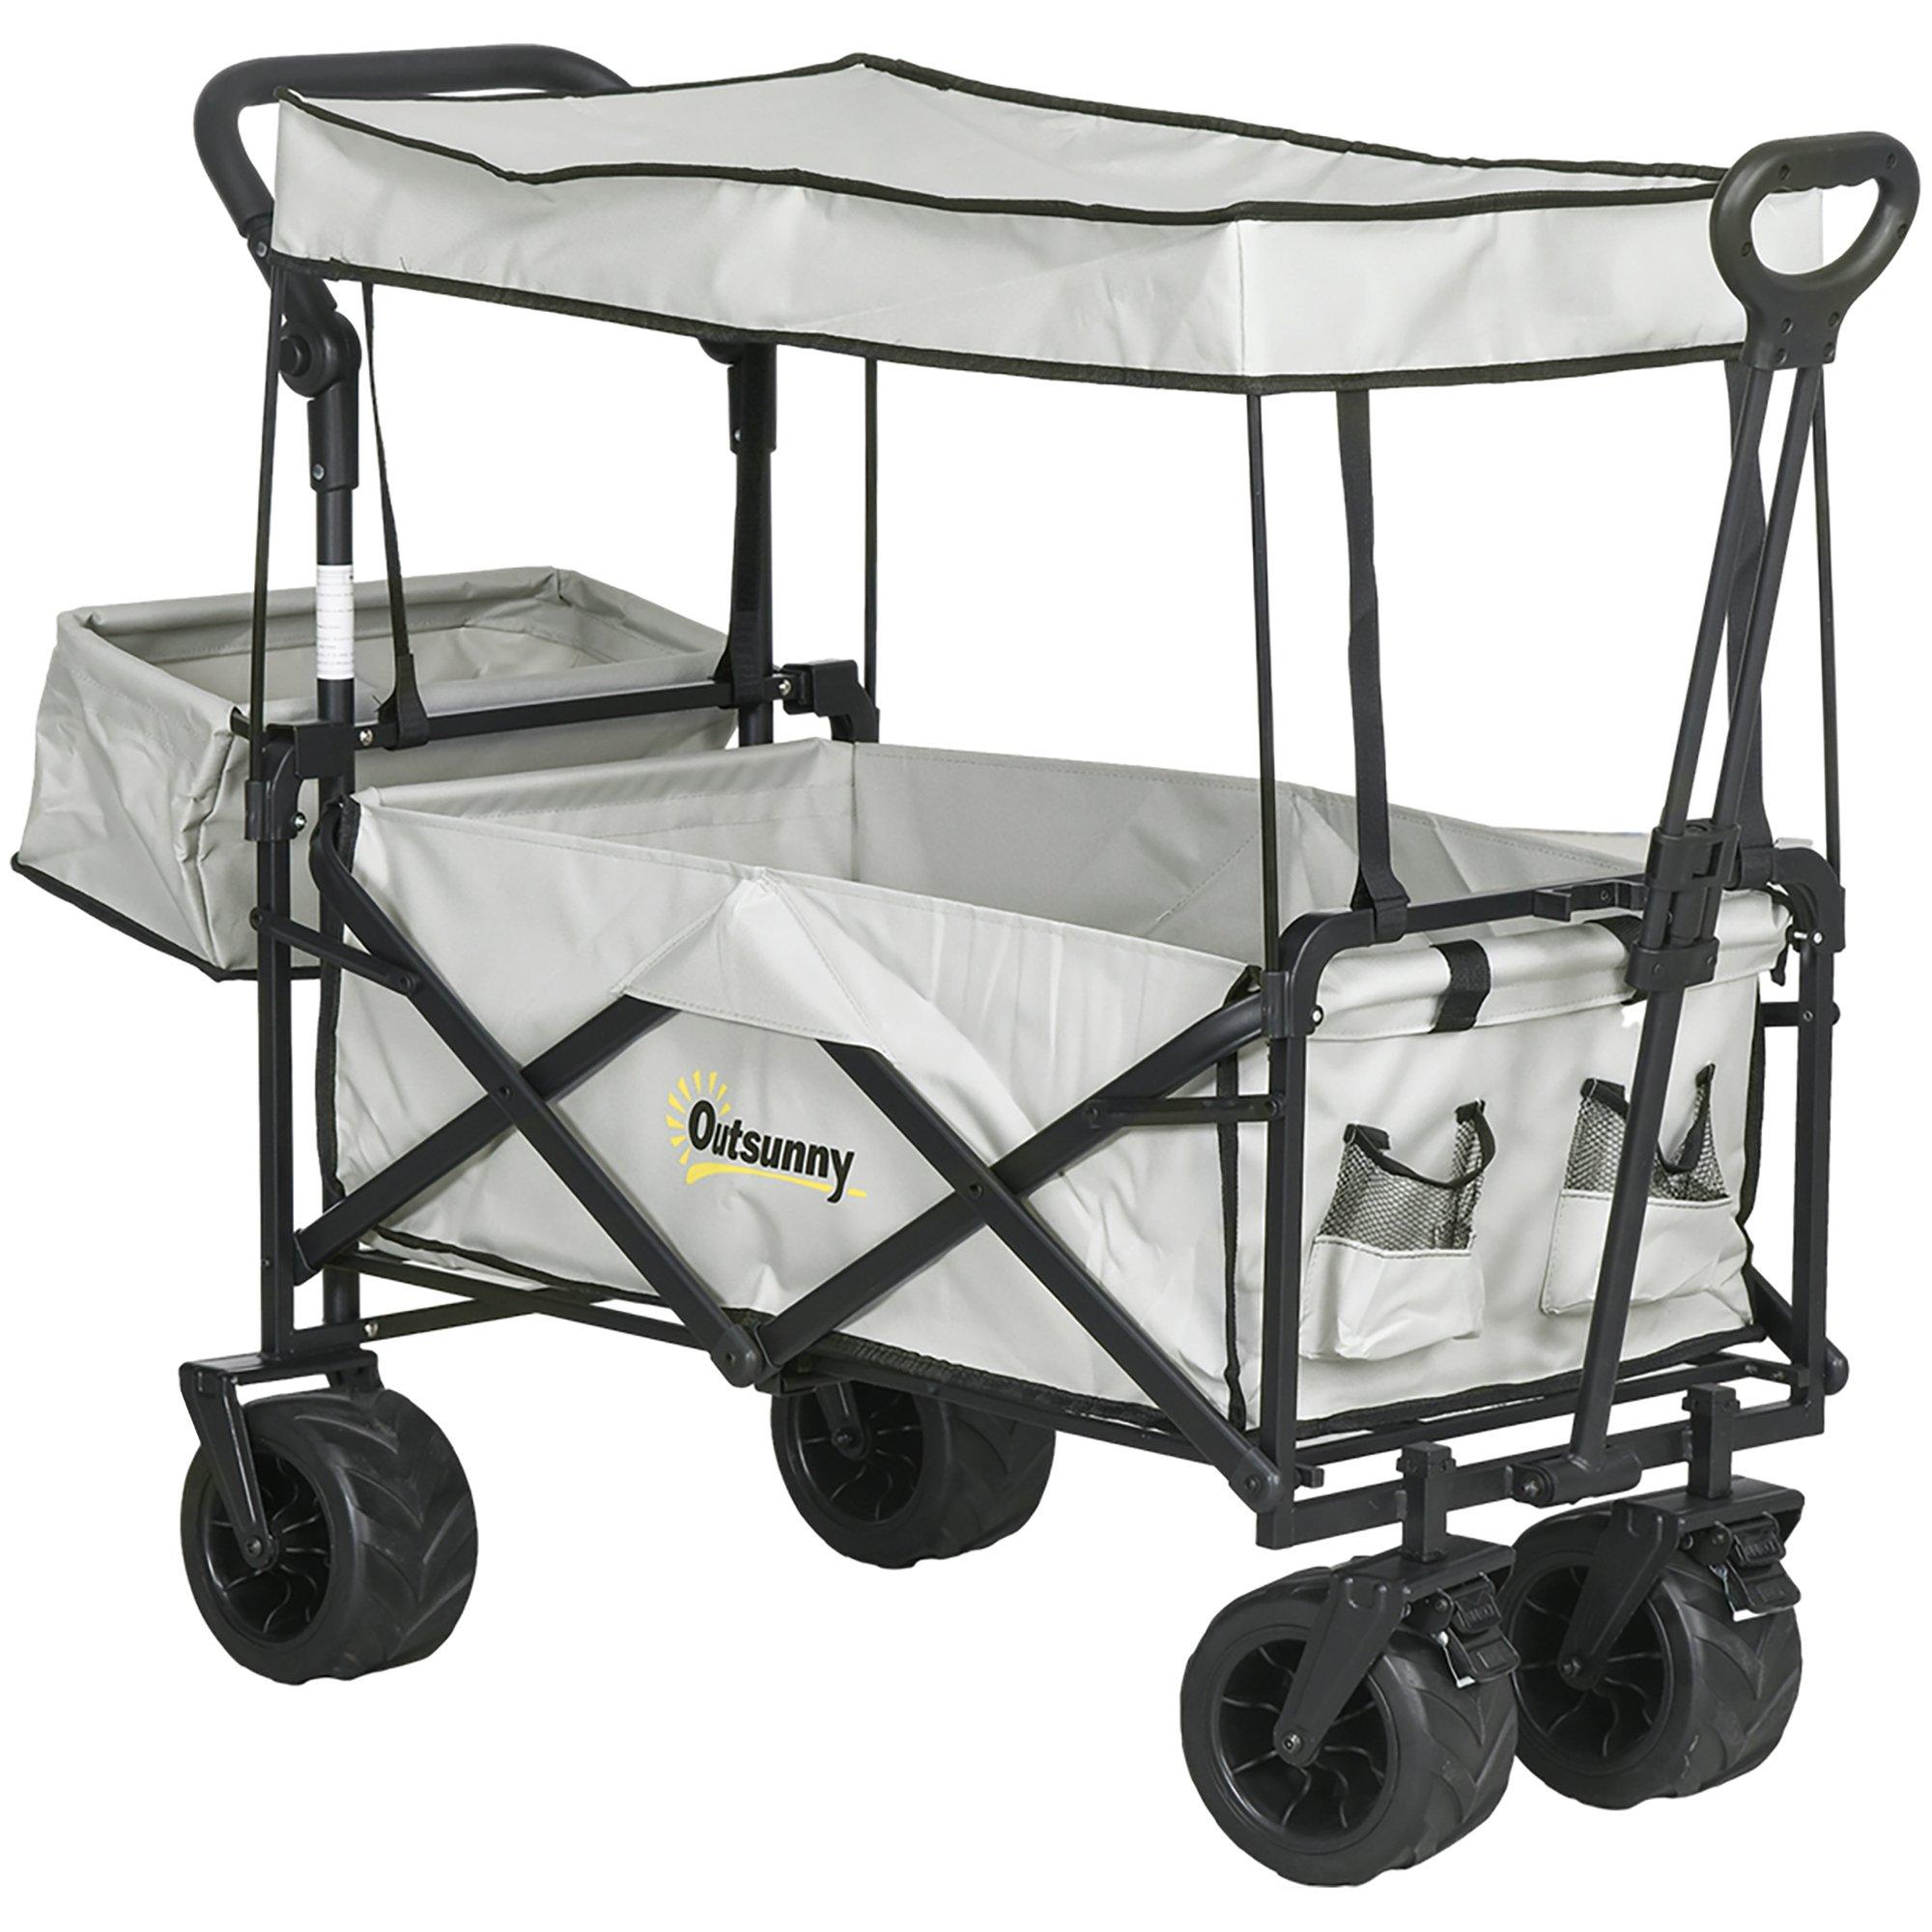 Outdoor Push Pull Wagon Stroller Cart w/ Canopy Top